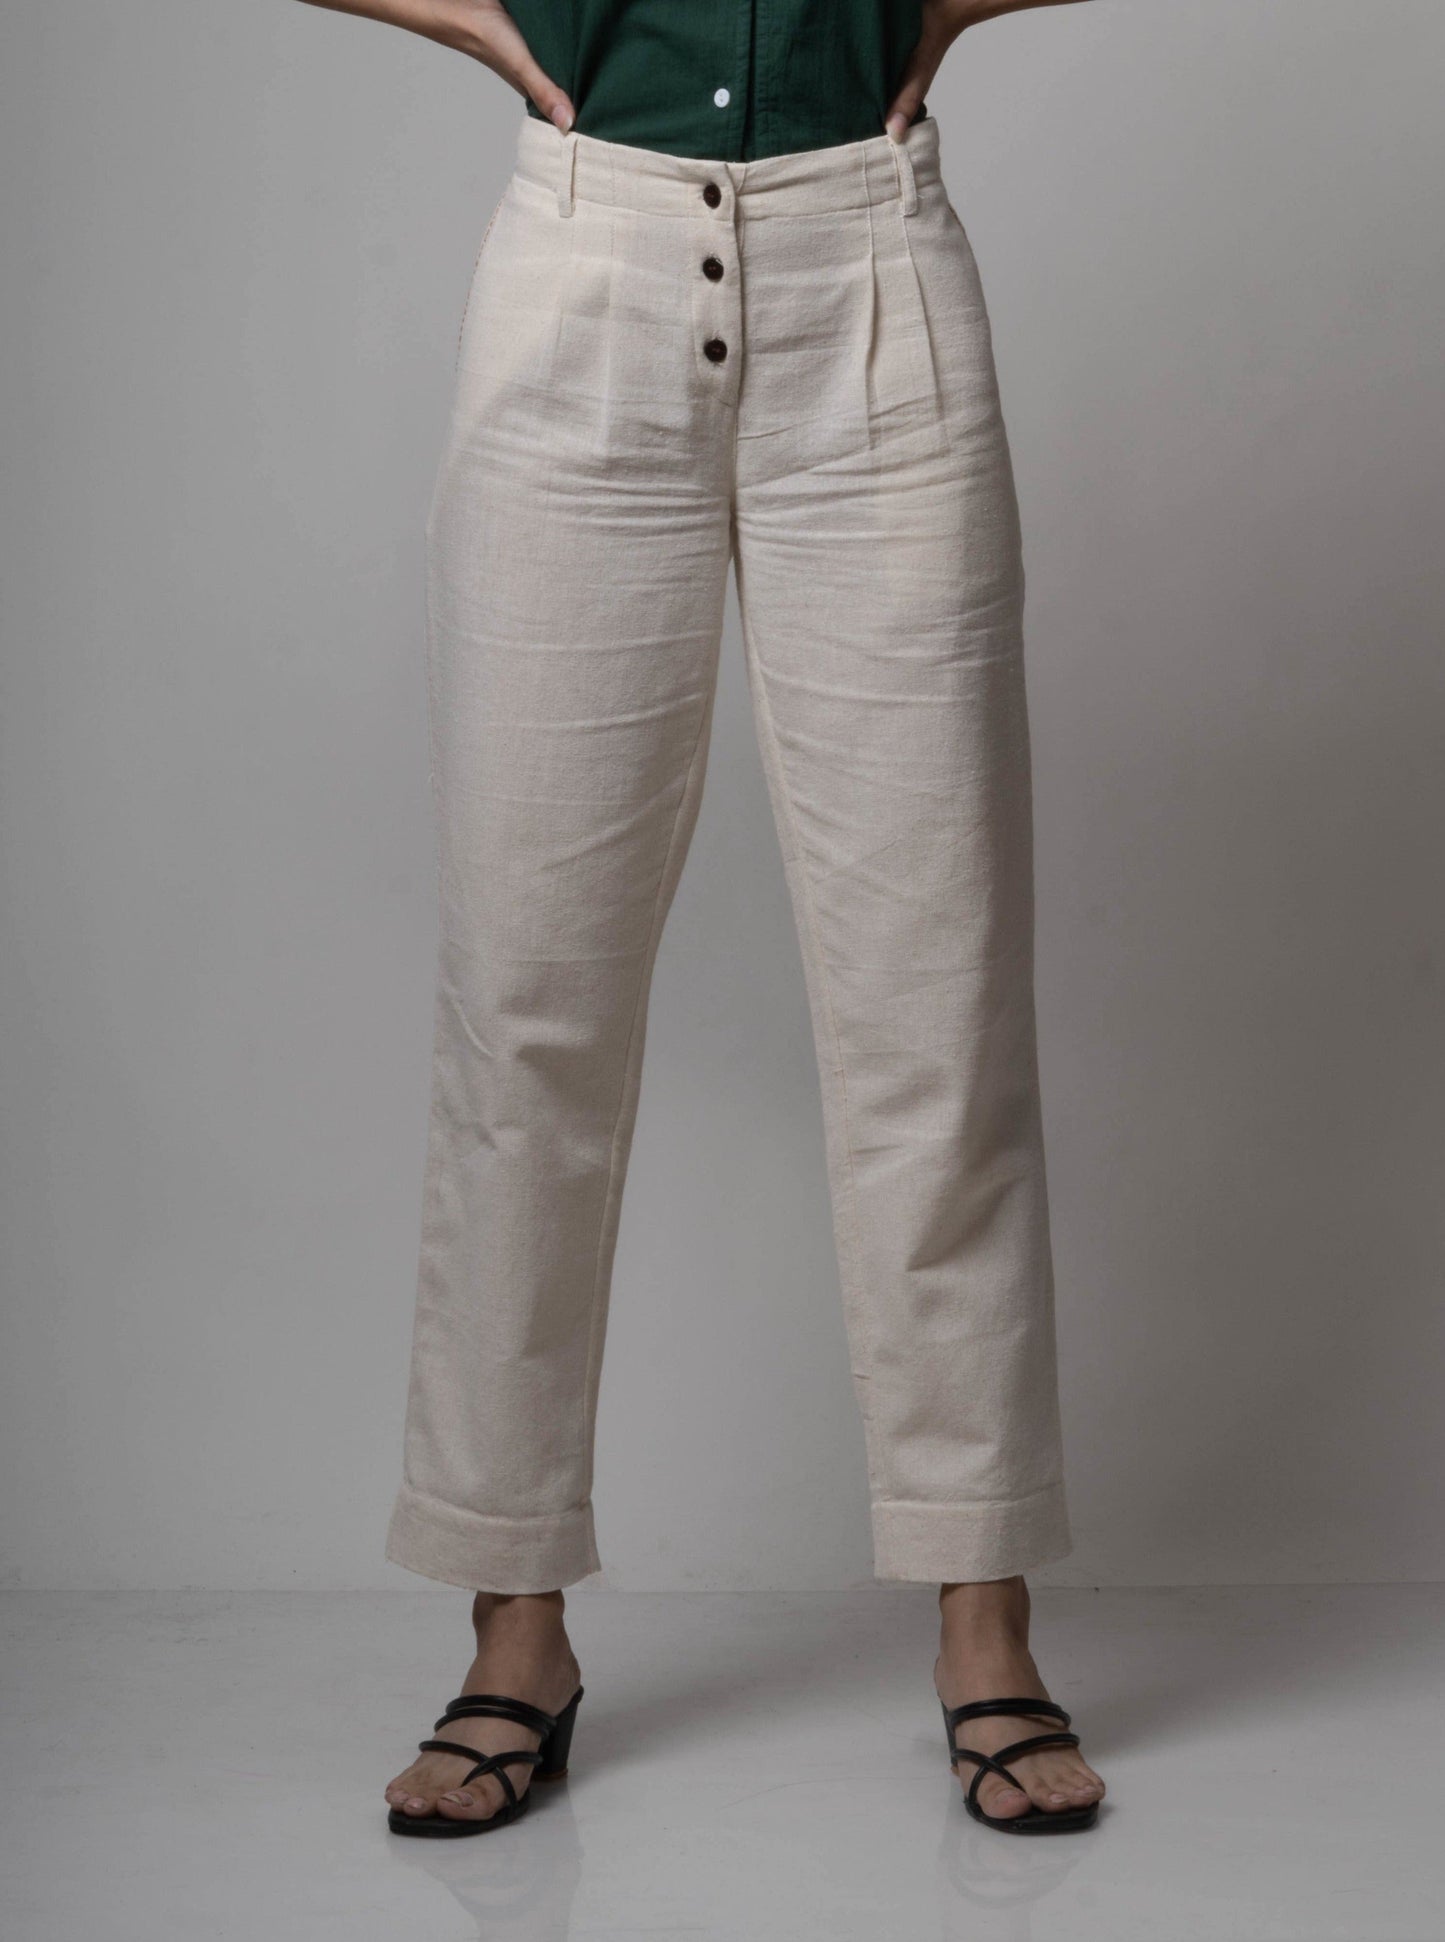 White Pants by Lafaani with Casual Wear, Cotton, Natural, Pants, Regular Fit, Solids, The Way You Look by Lafaani, White, Womenswear at Kamakhyaa for sustainable fashion